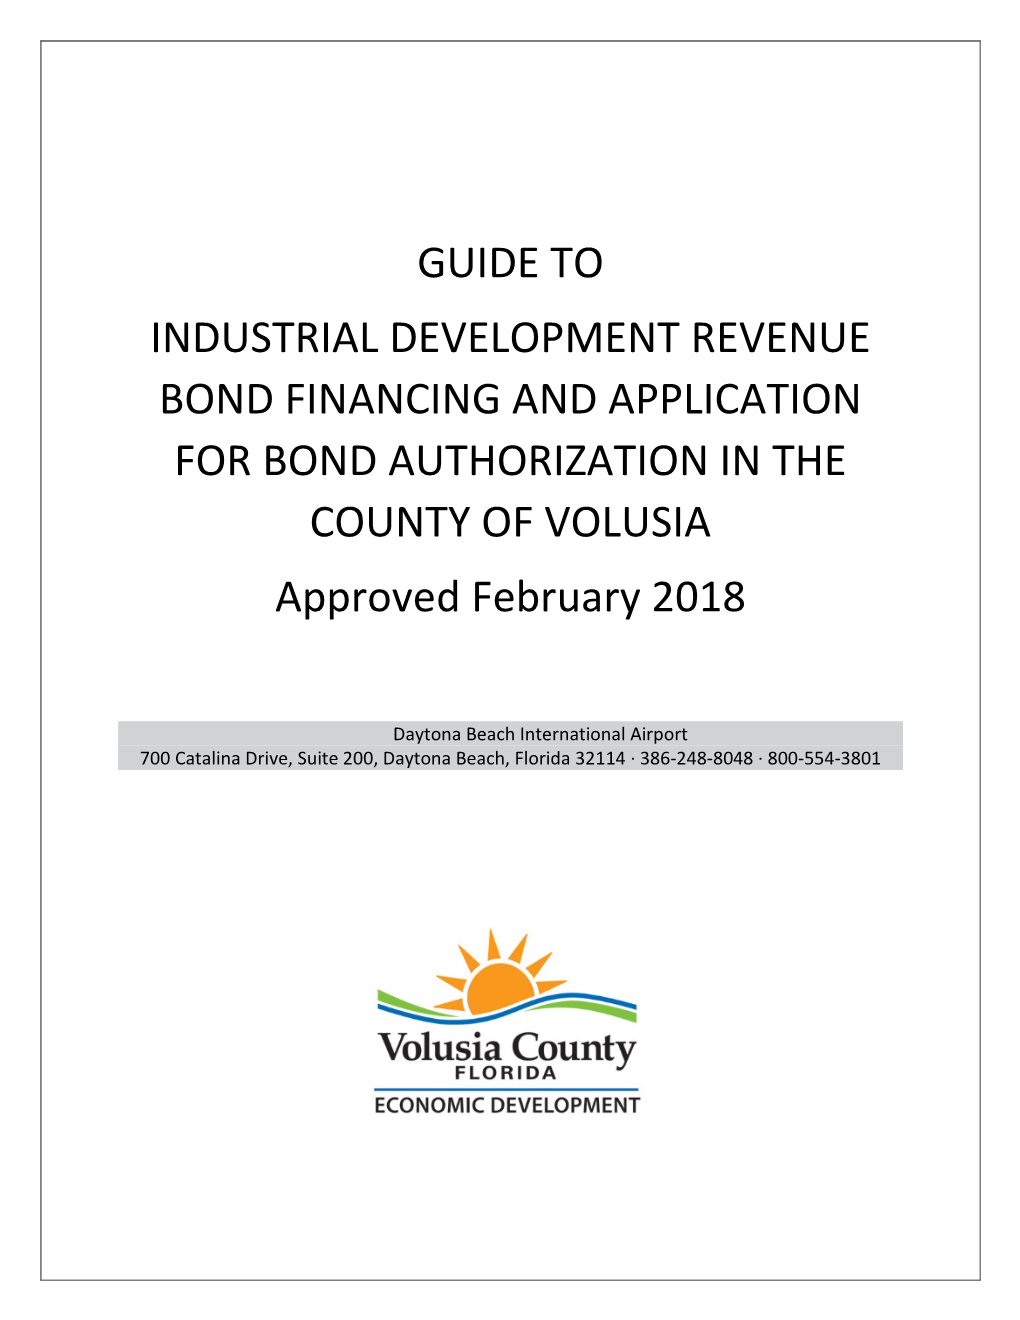 GUIDE to INDUSTRIAL DEVELOPMENT REVENUE BOND FINANCING and APPLICATION for BOND AUTHORIZATION in the COUNTY of VOLUSIA Approved February 2018